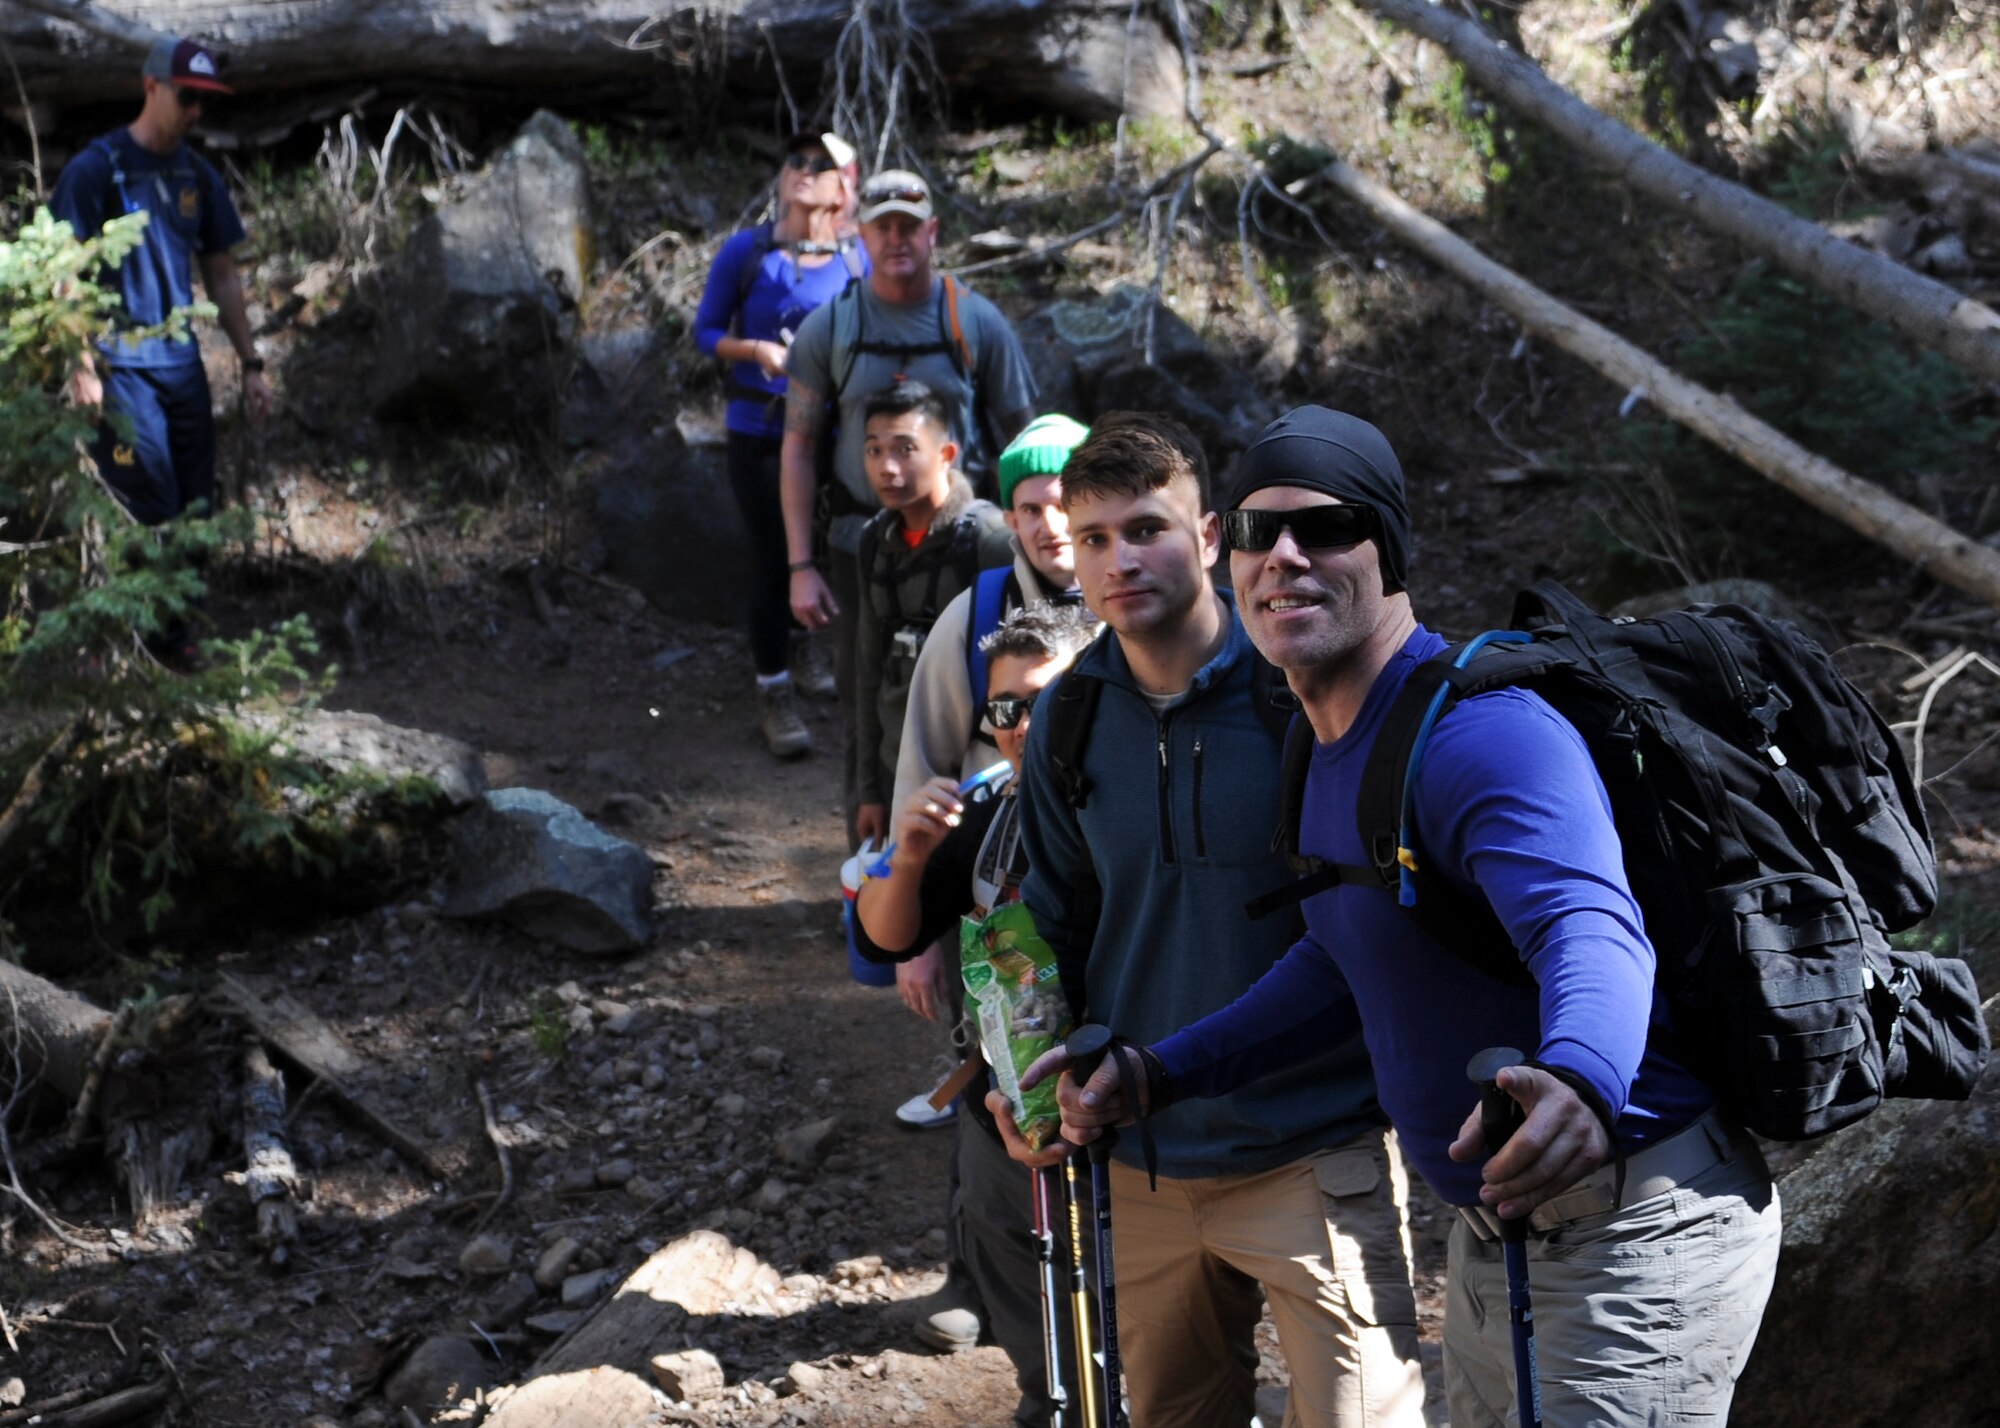 Participants of the U.S. Air Force 50 Summits Challenge hike up a mountain trail to Humphreys Peak Ariz., May 29, 2016. The level of hiking experience varied among the participants, with times ranging from eight to eleven hours to champion the 12,633 foot peak. (U.S. Air Force photo by Airman 1st Class Ashley N. Steffen/Released)